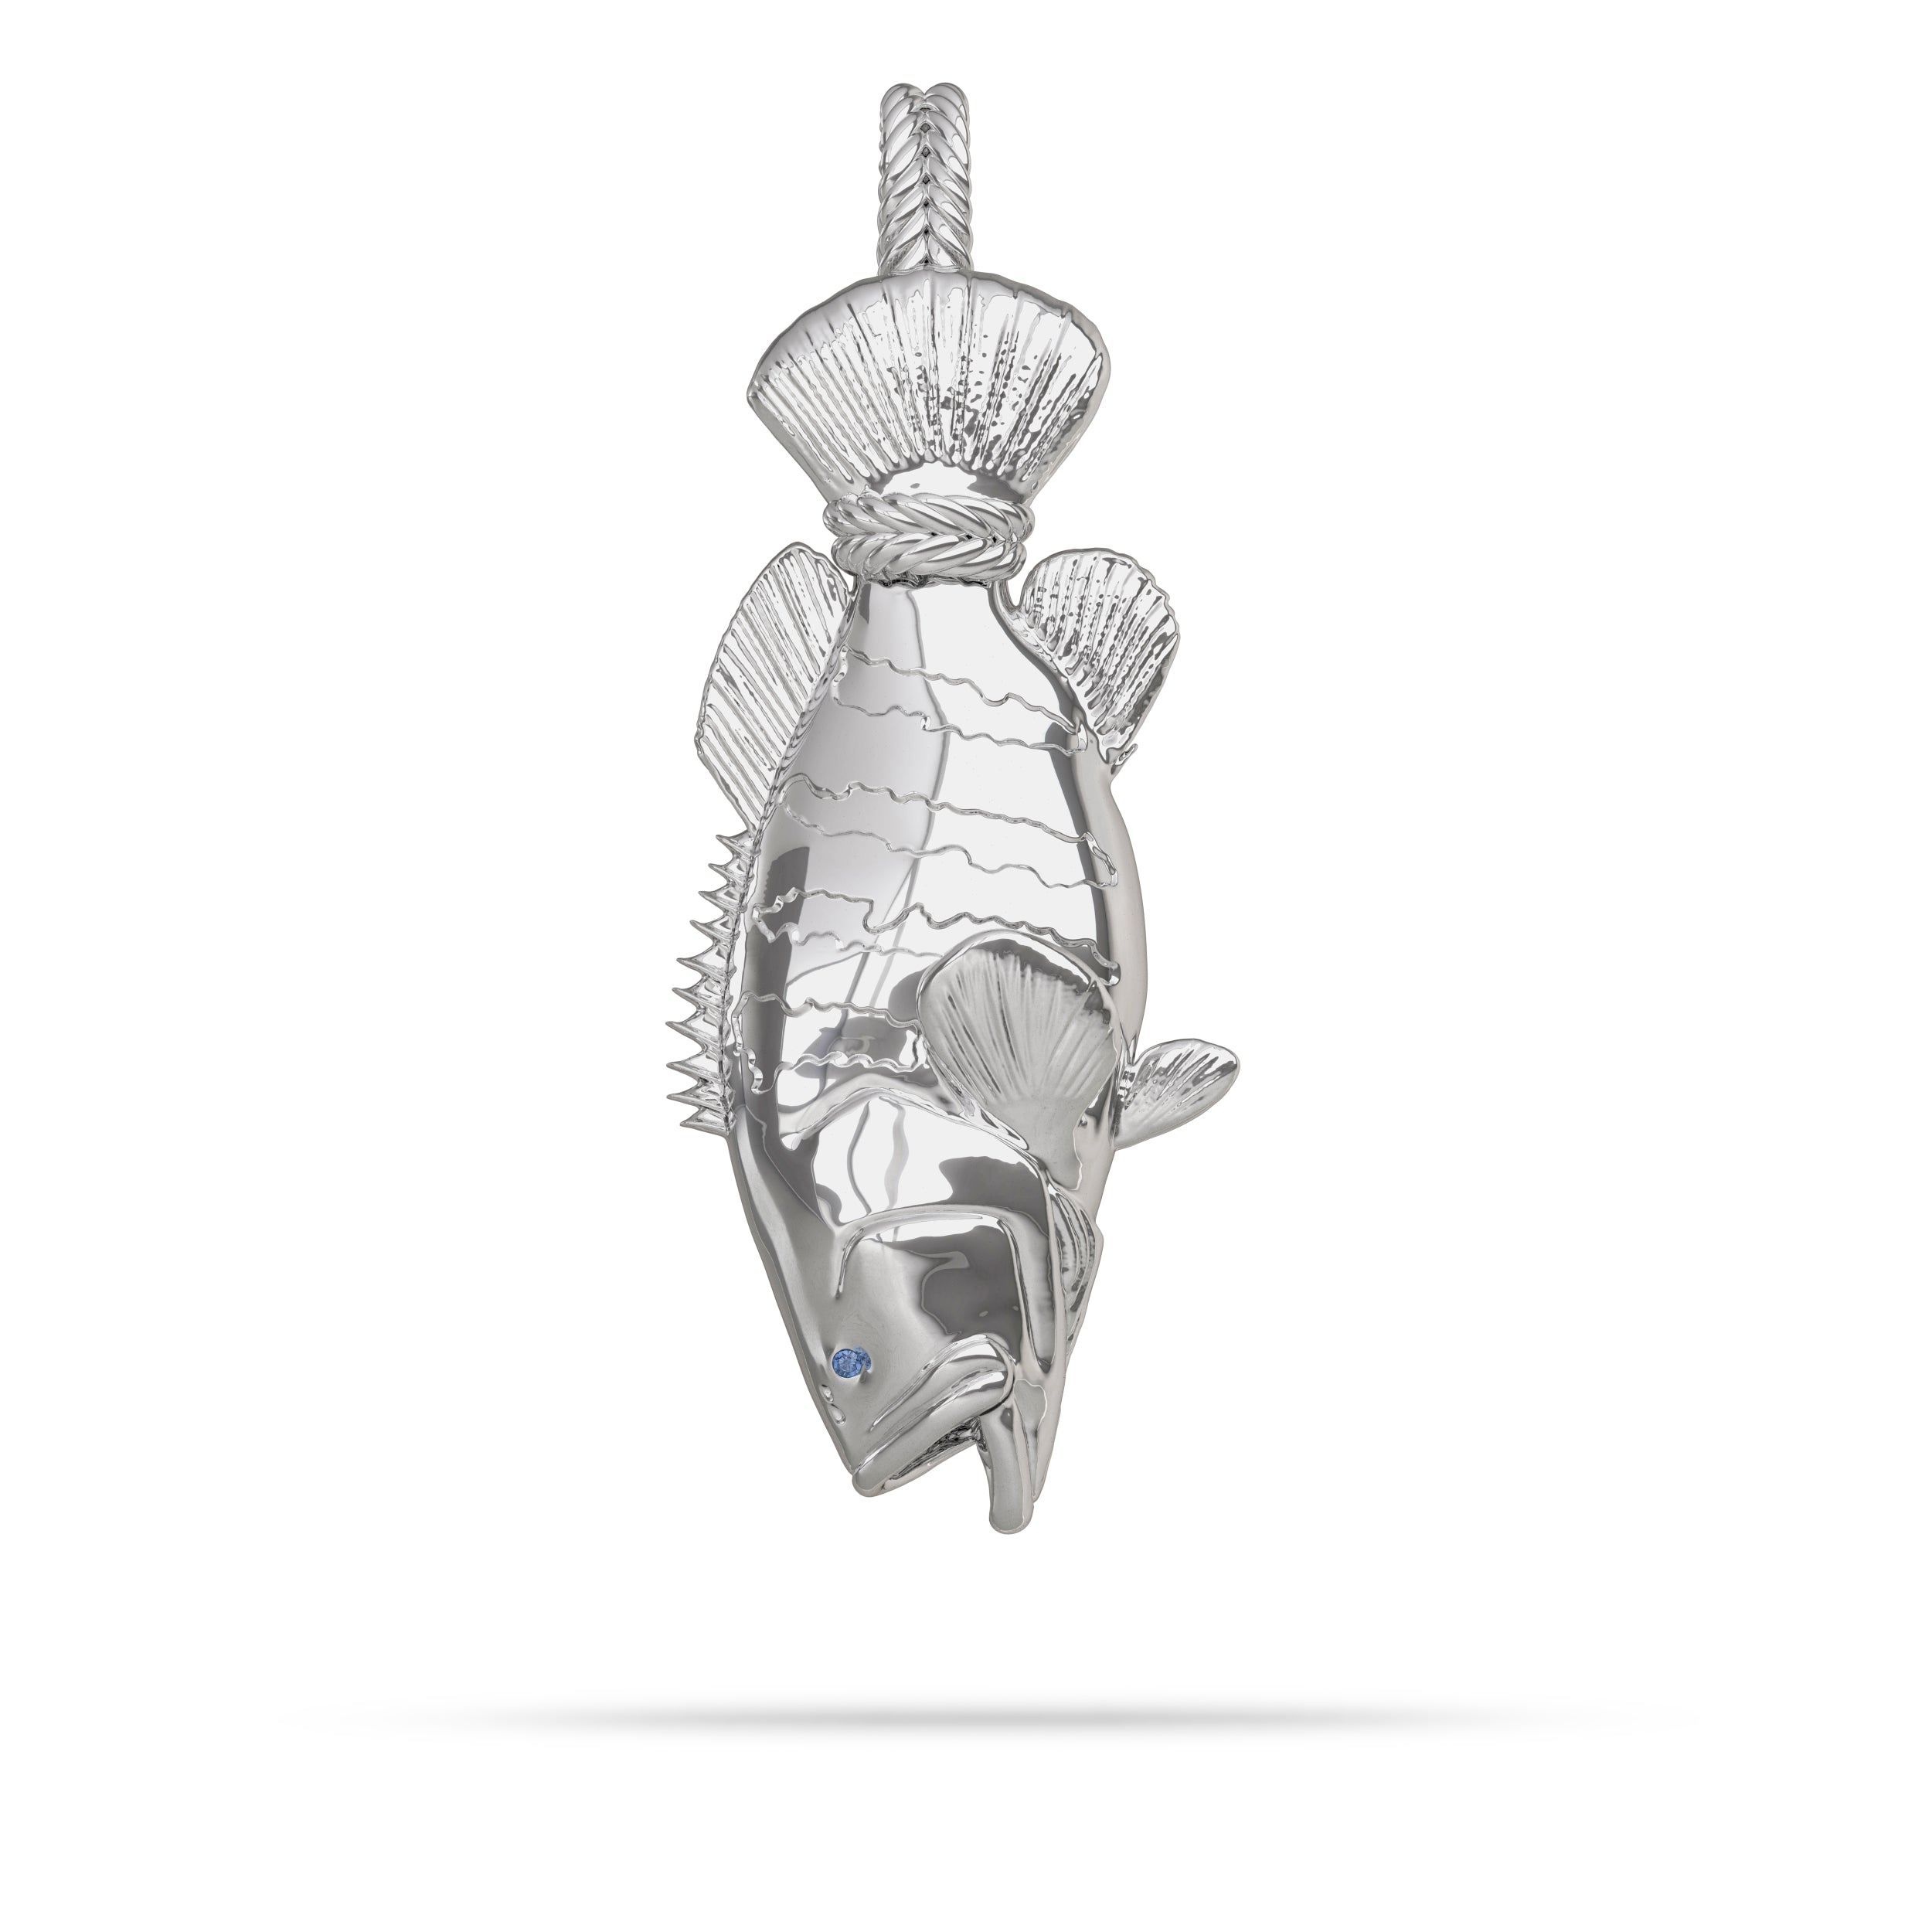 Largemouth Bass Silver Pewter Pendant Necklace, fish fishing angler angling  | eBay